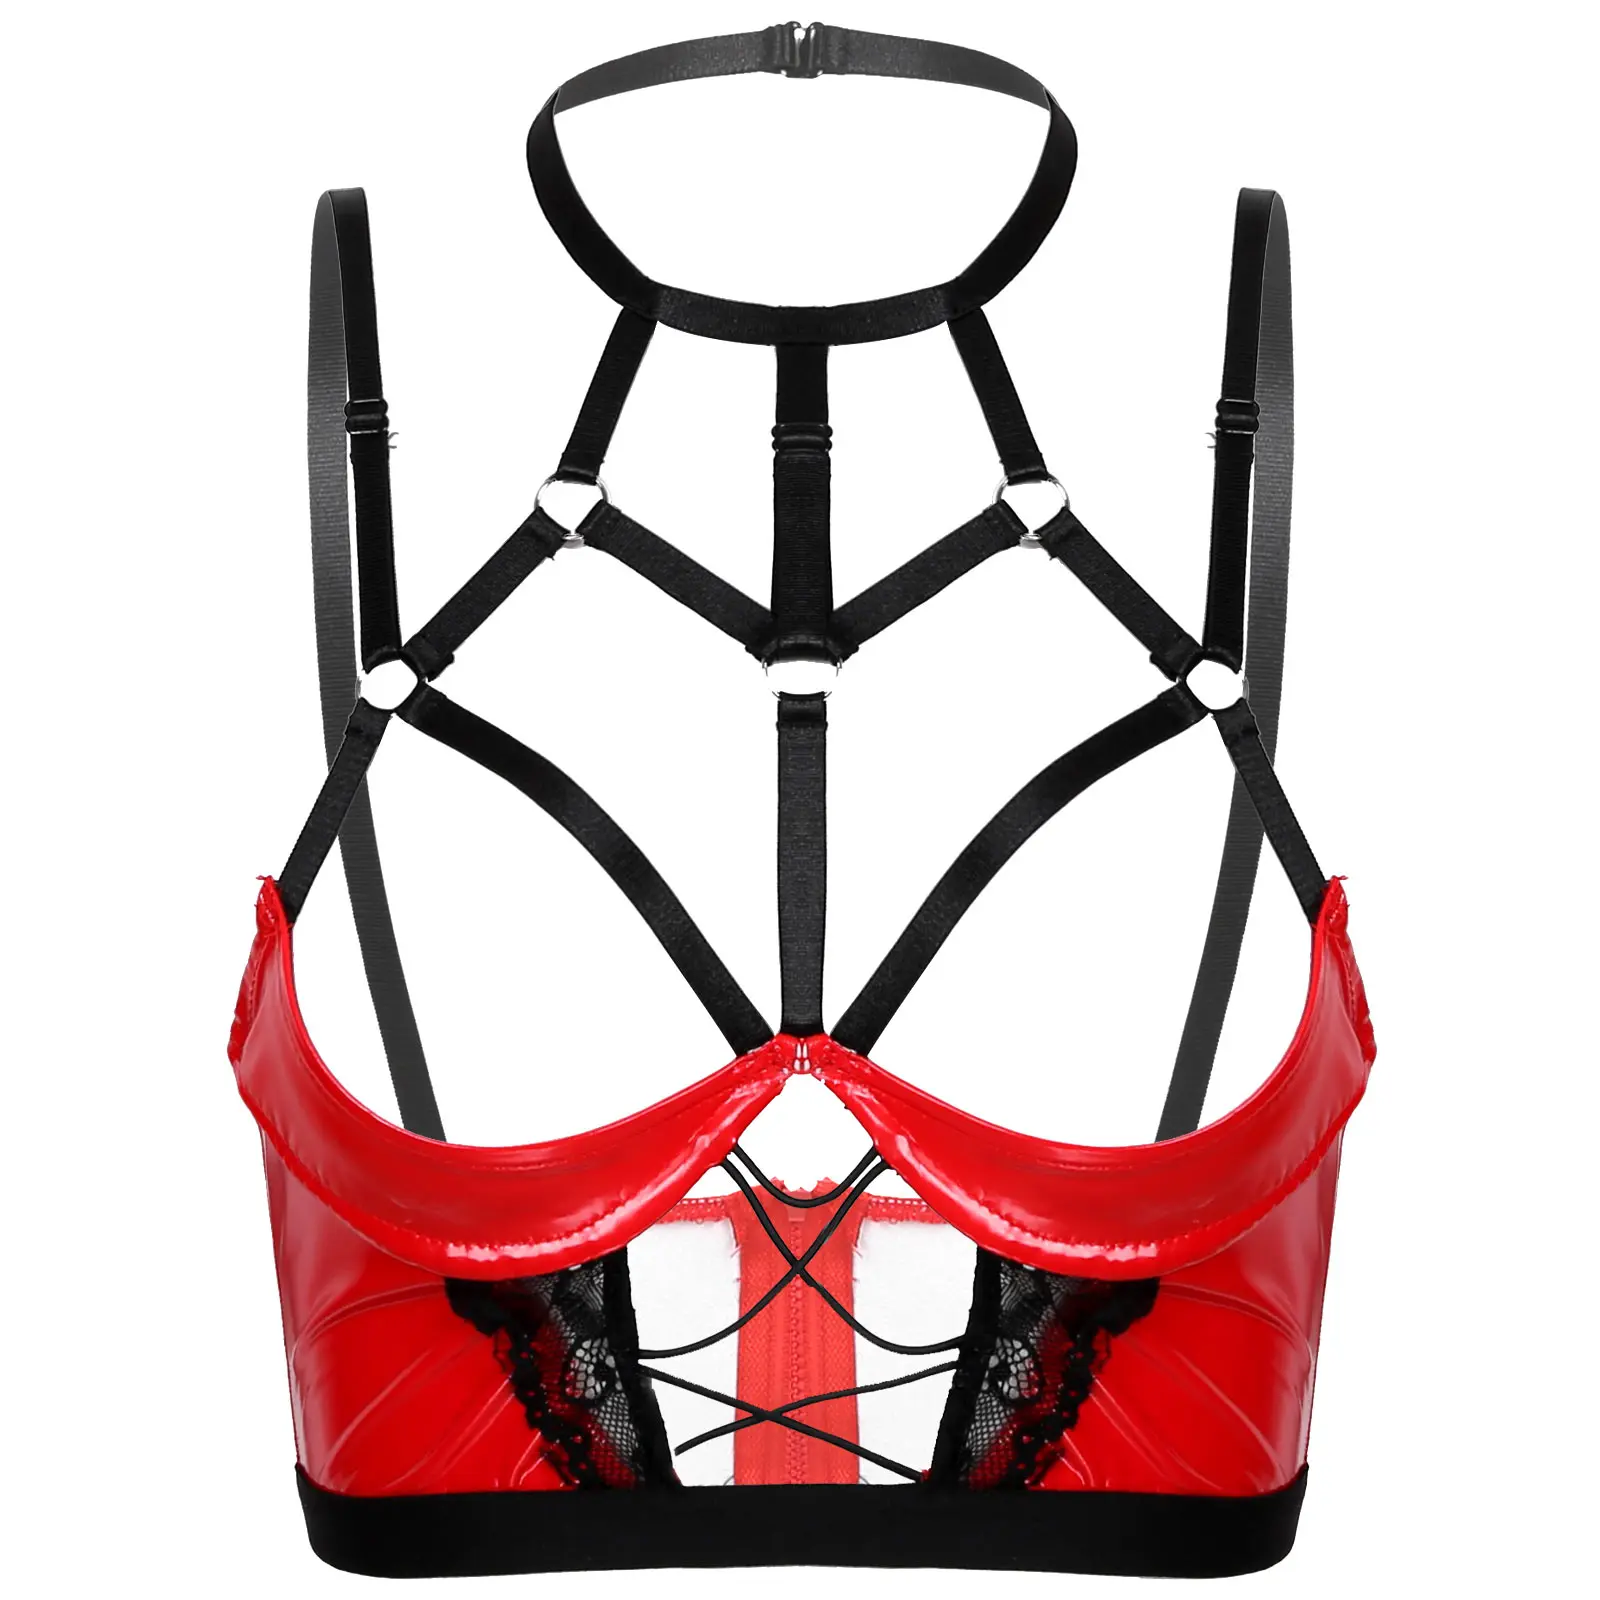 

Womens Erotic Lingerie Patent Leather Bra Tops Back Zipper Underwire Unlined Brassiere Halter Neck Hollow Out Strappy Hot Bra